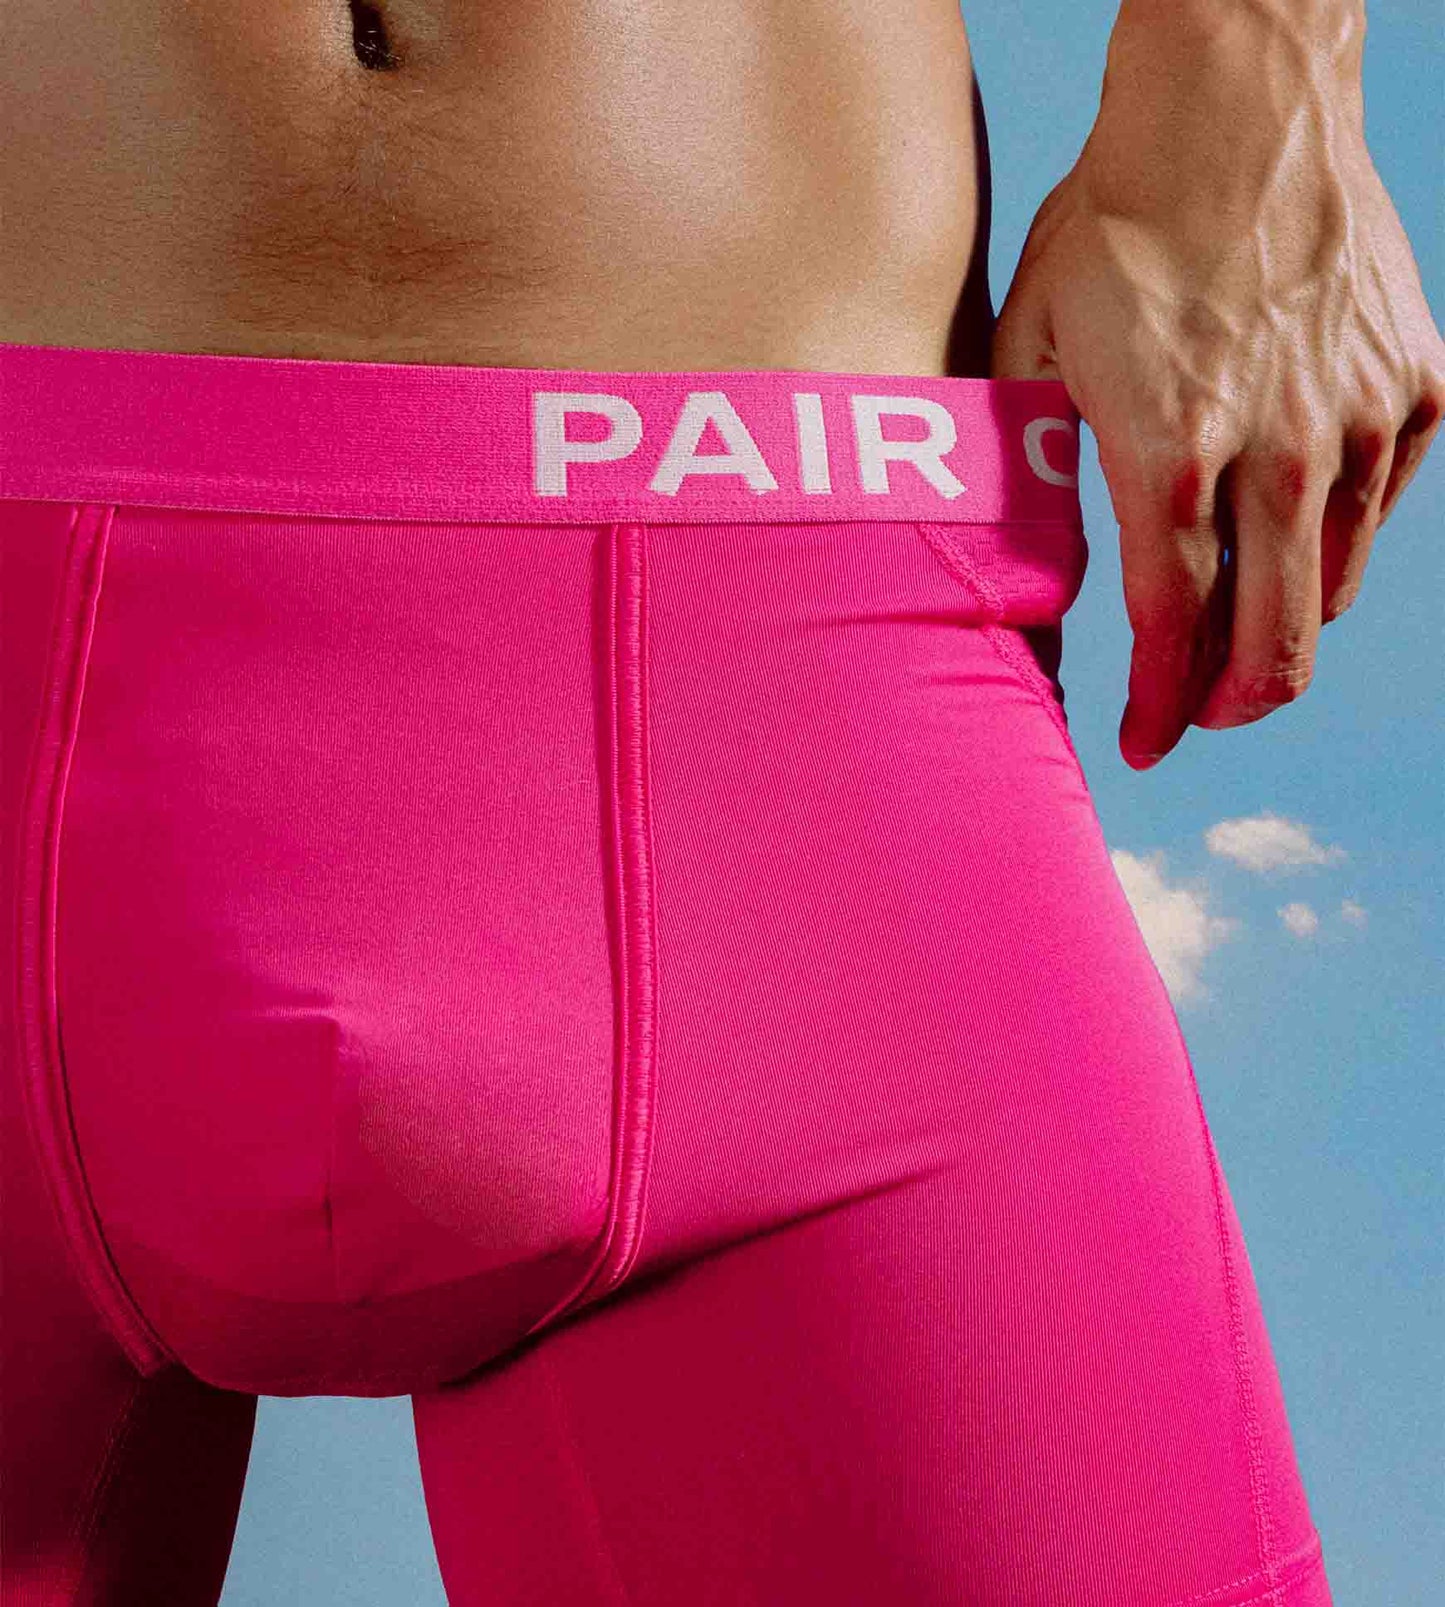 More than 25,000 shoppers love these super breathable boxer briefs